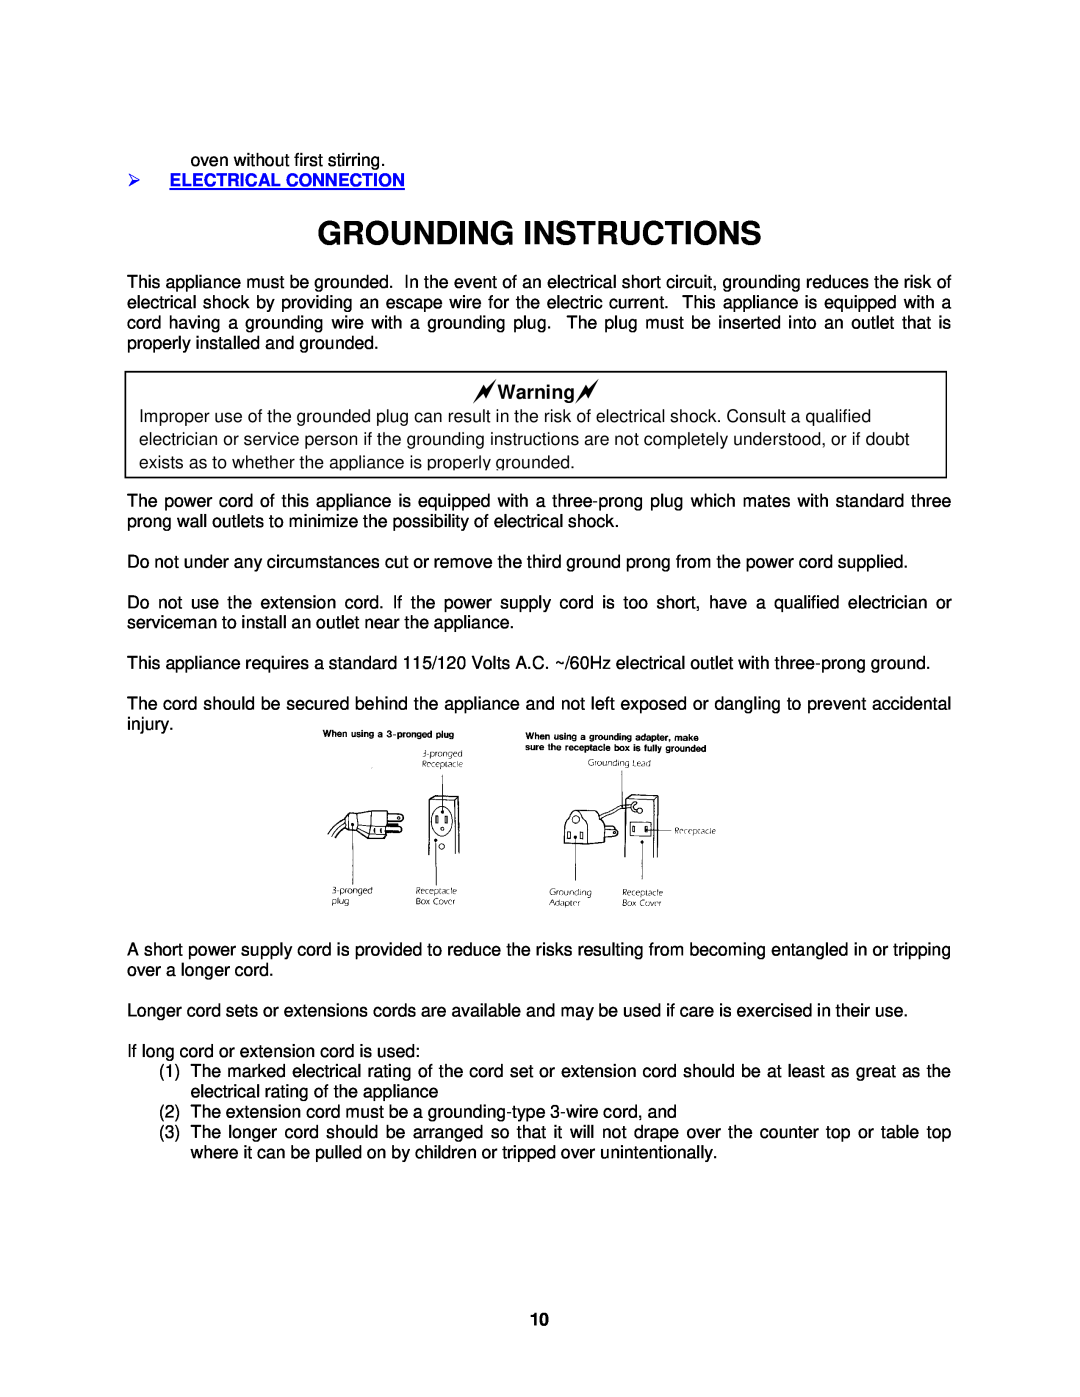 Avanti MO7201TB, MO7200TW, MO7212SST operating instructions Grounding Instructions, Warning, Electrical Connection 